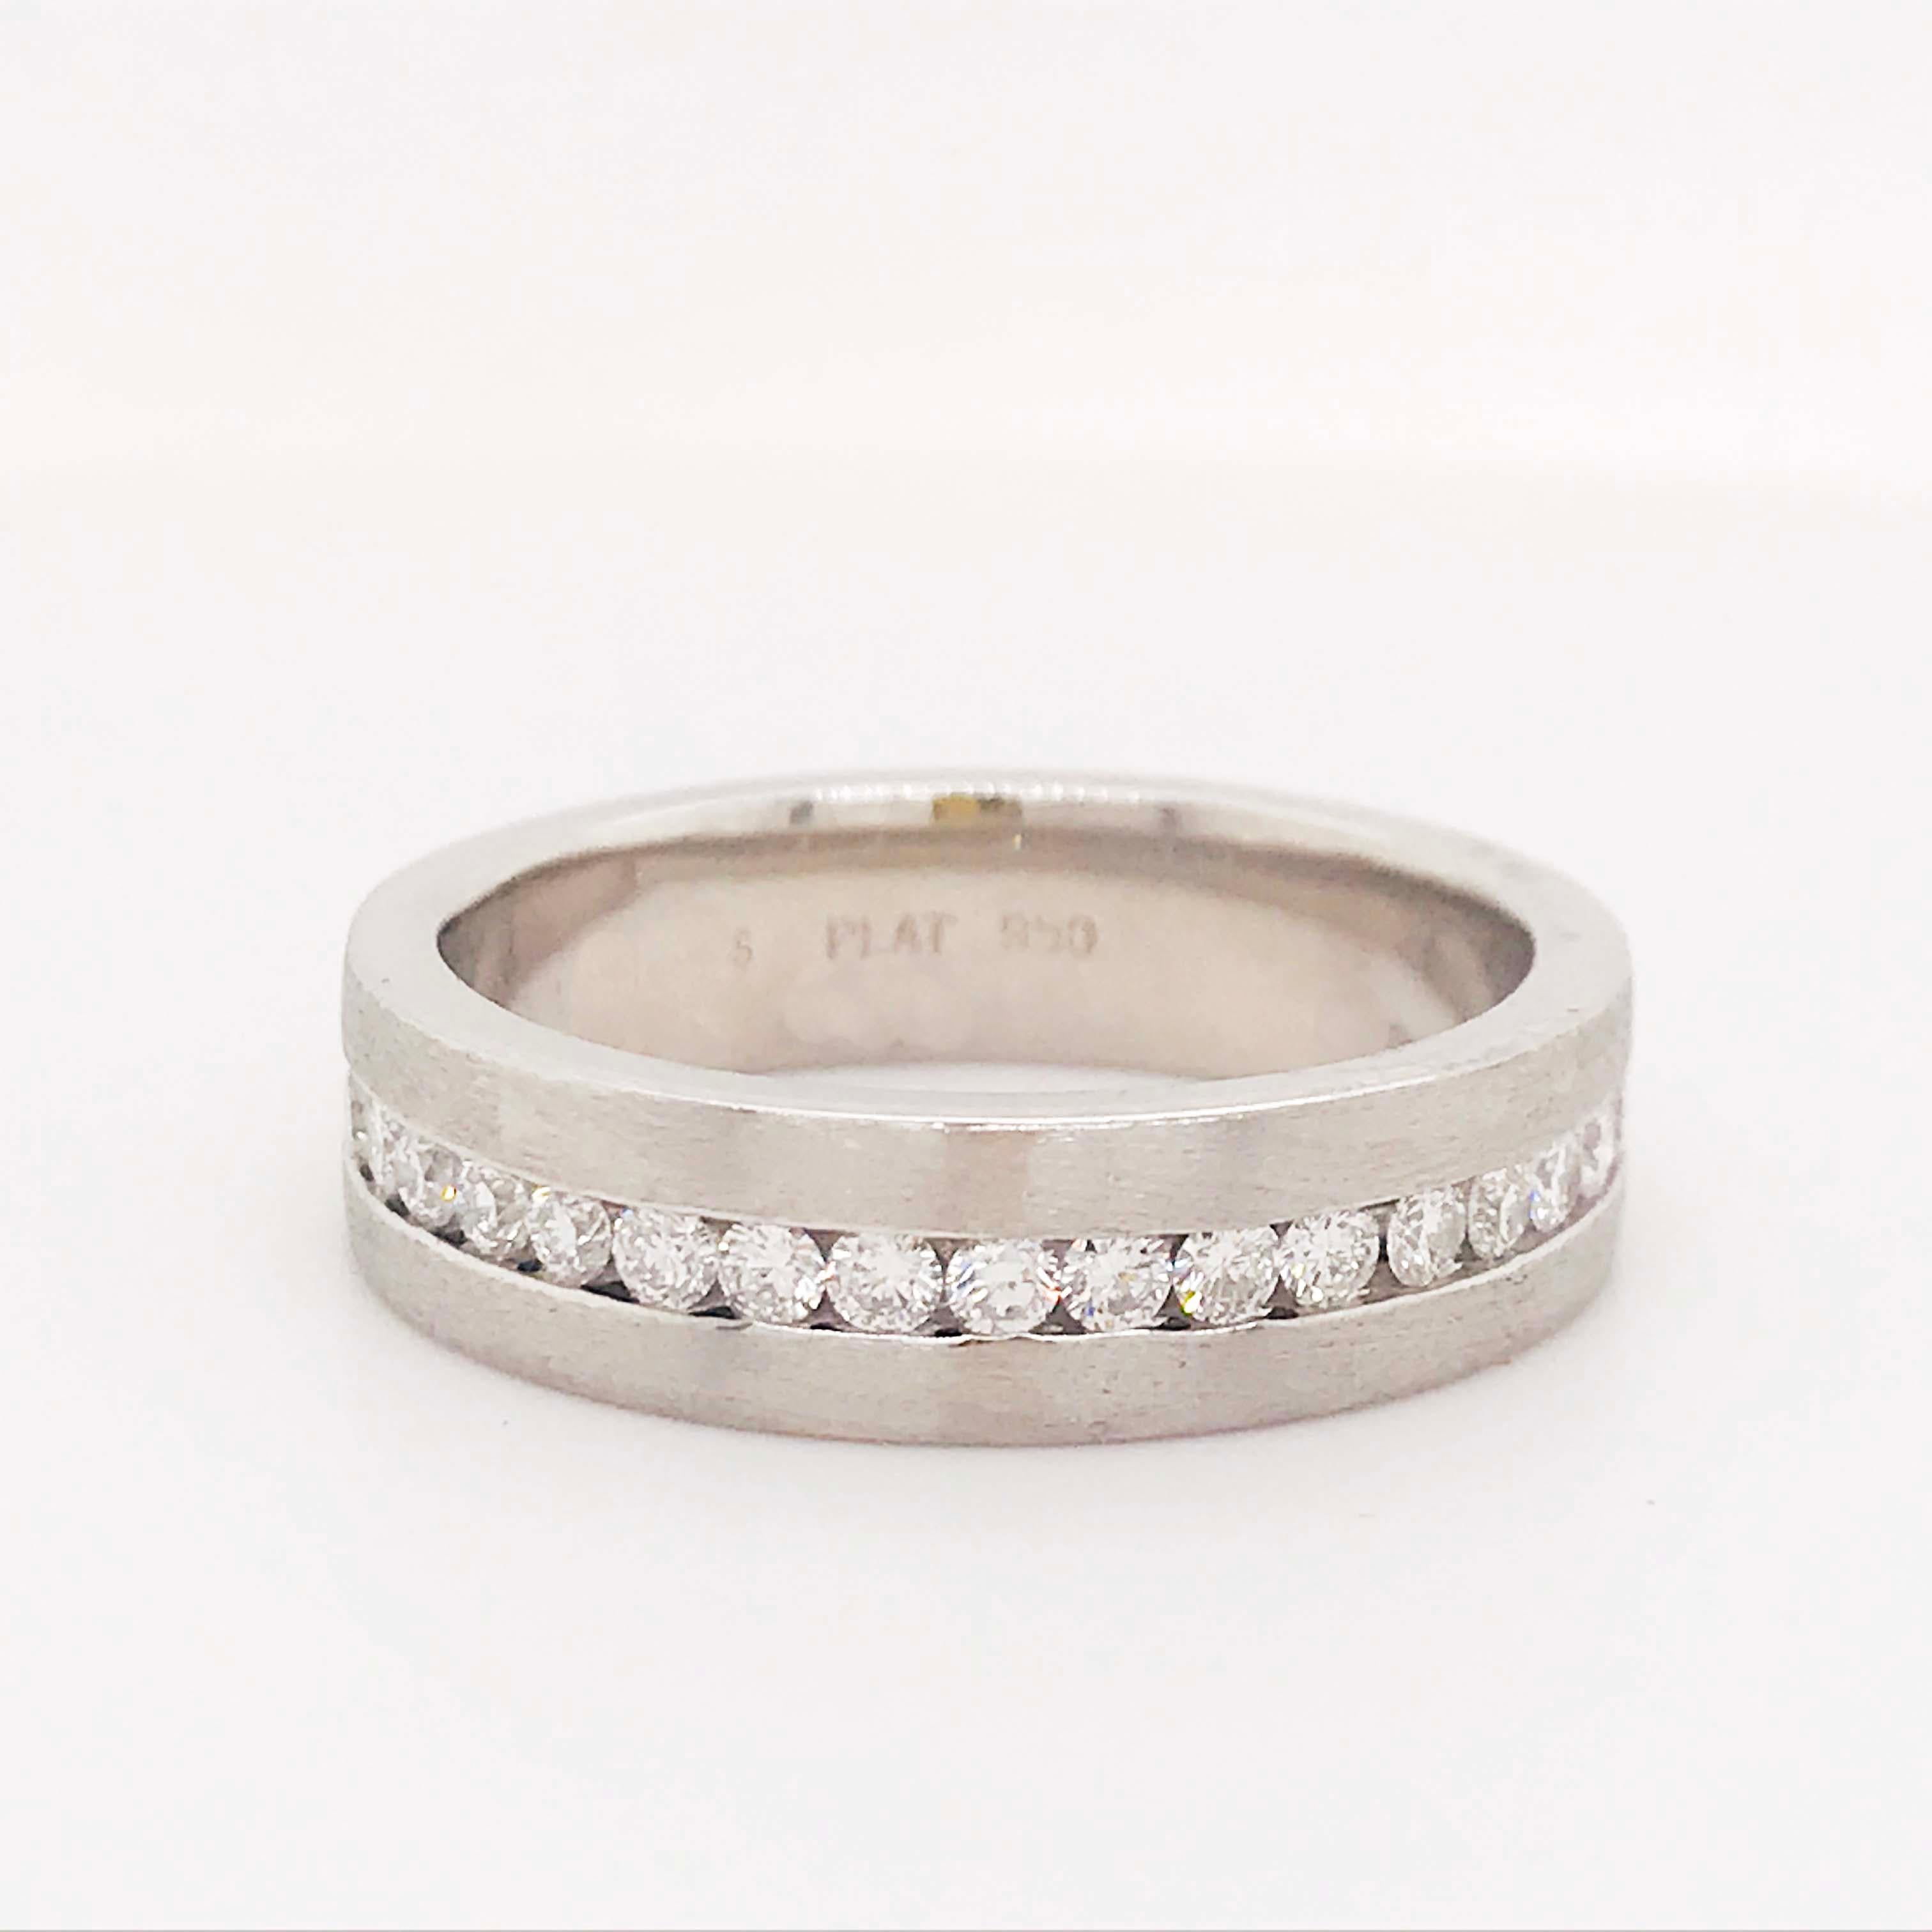 Modern diamond and platinum men's wedding band. This authentic platinum and diamond design is modern and classy! The 6mm wide men's band is made of the precious metal platinum. With genuine round brilliant diamonds set in a clean channel setting.